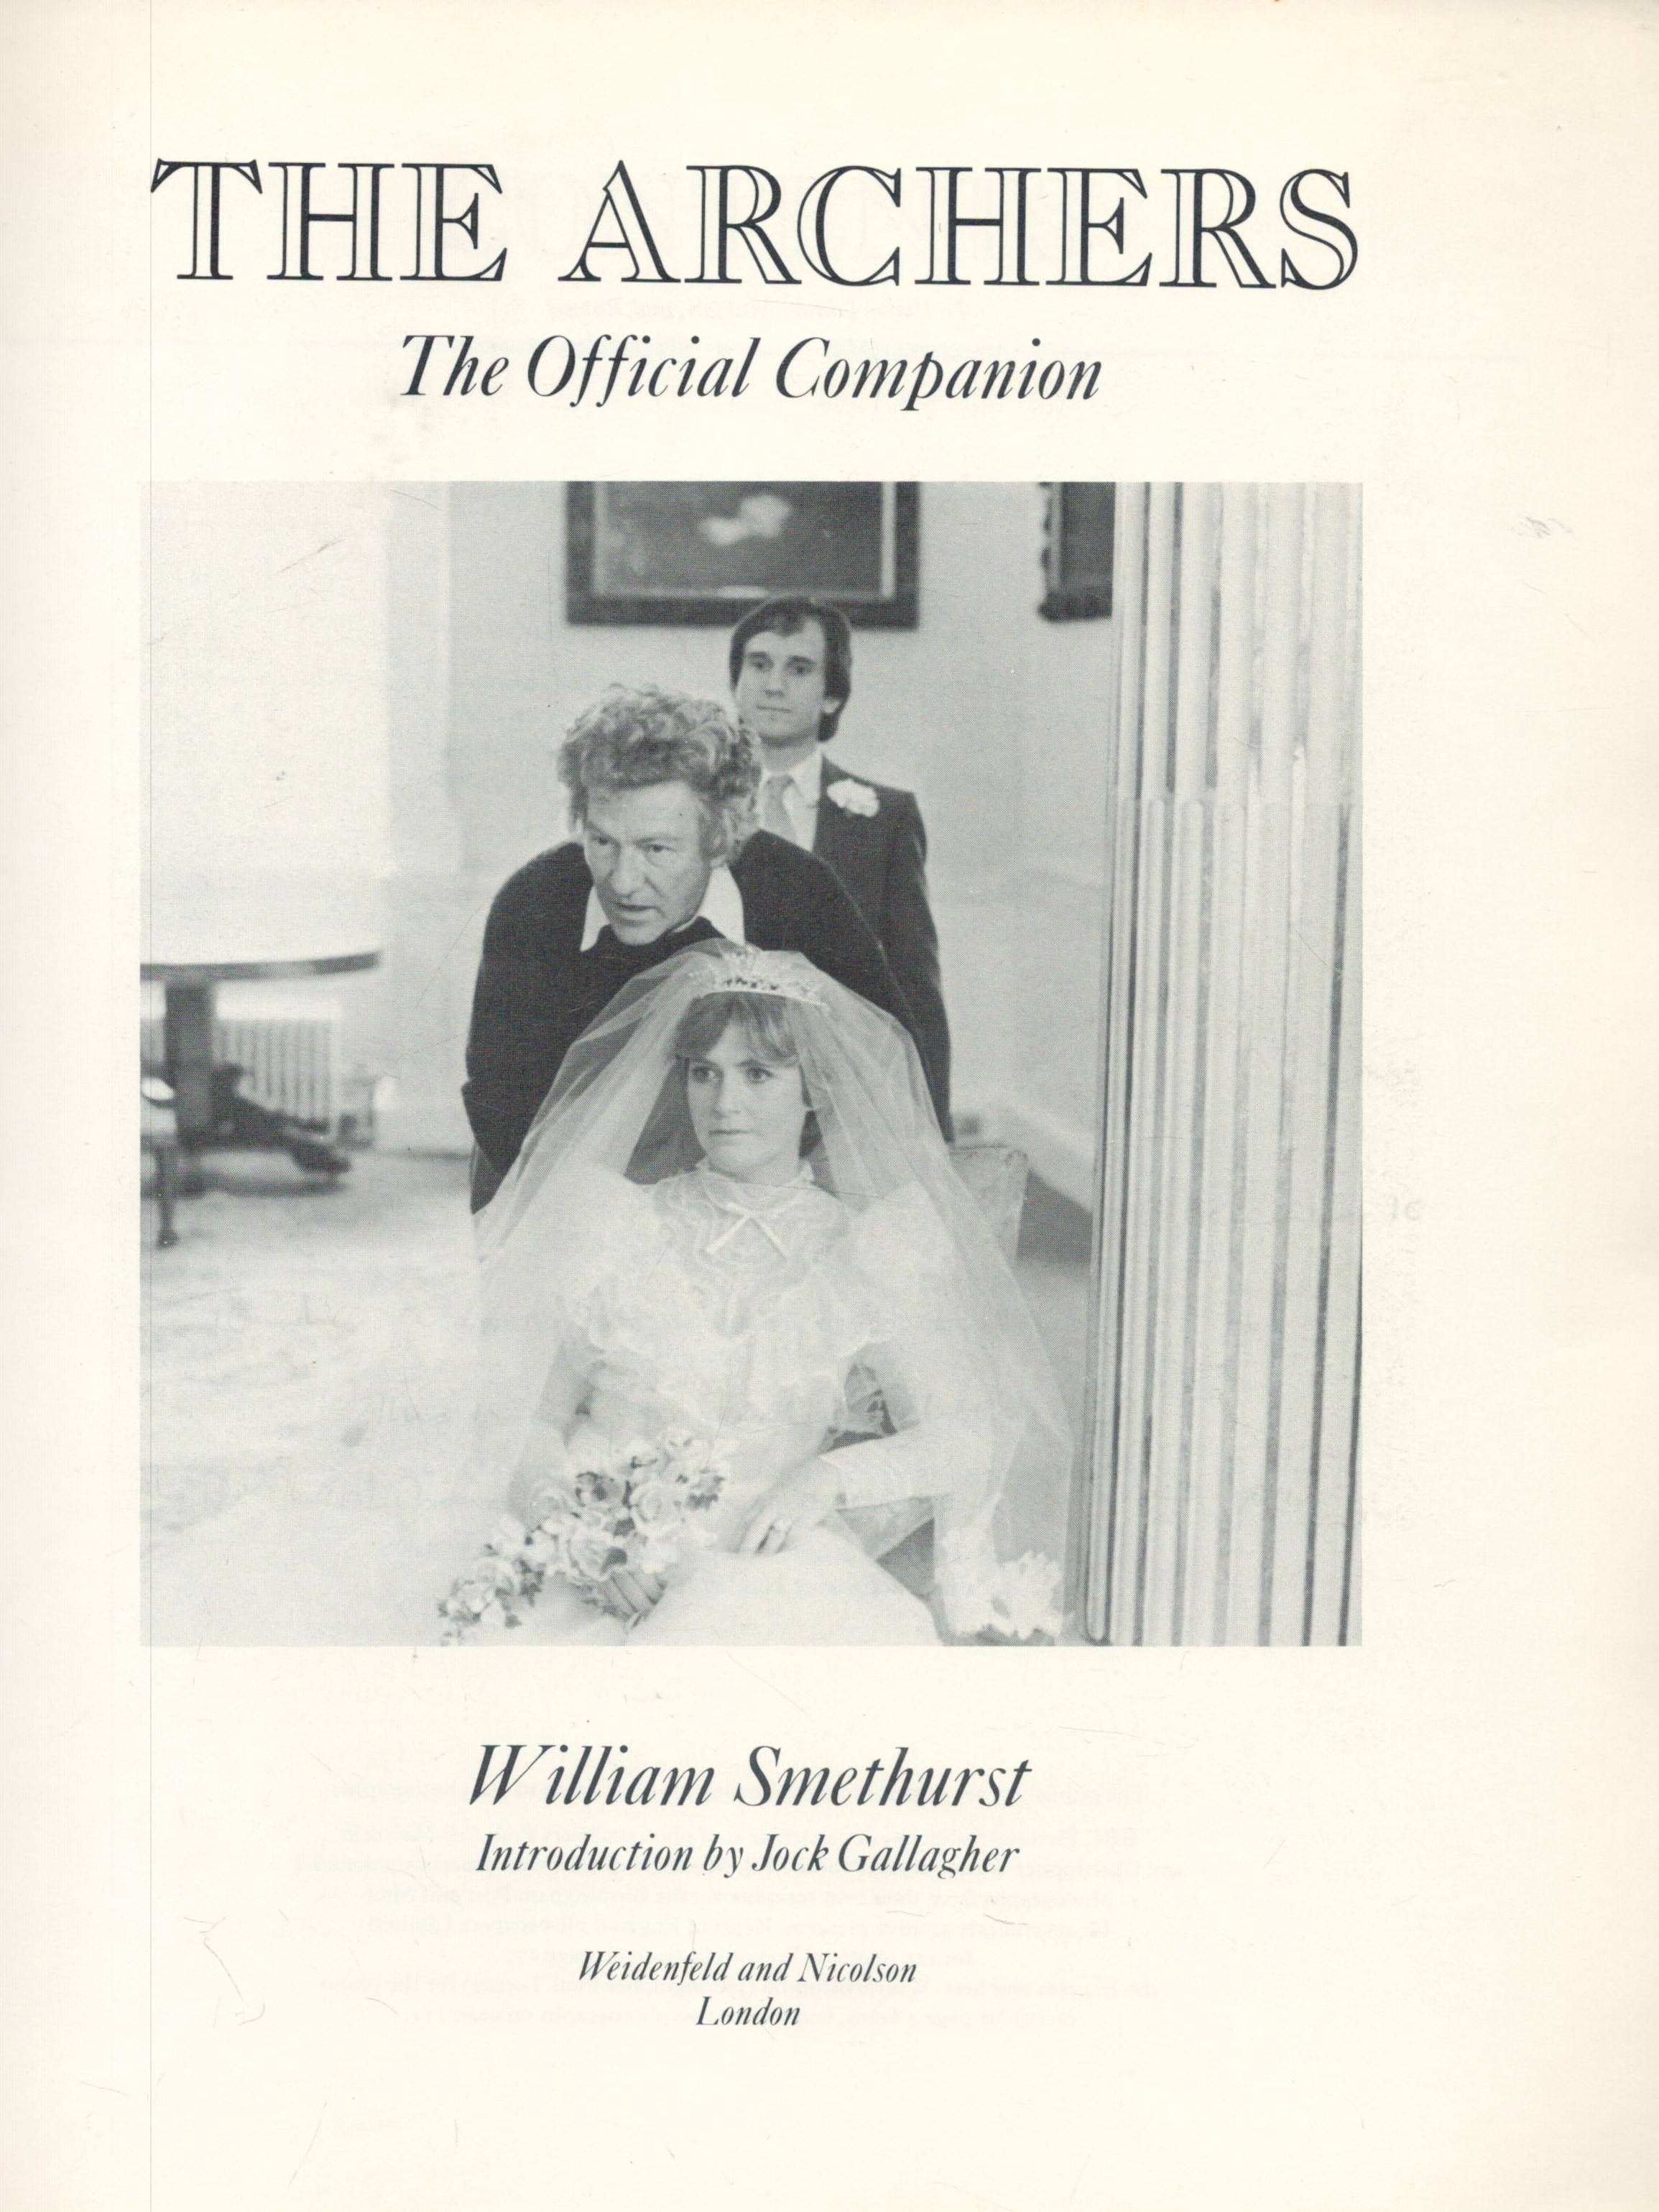 The Archers - The Official companion by William Smethurst 1986 First Paperback Edition Softback Book - Image 2 of 3